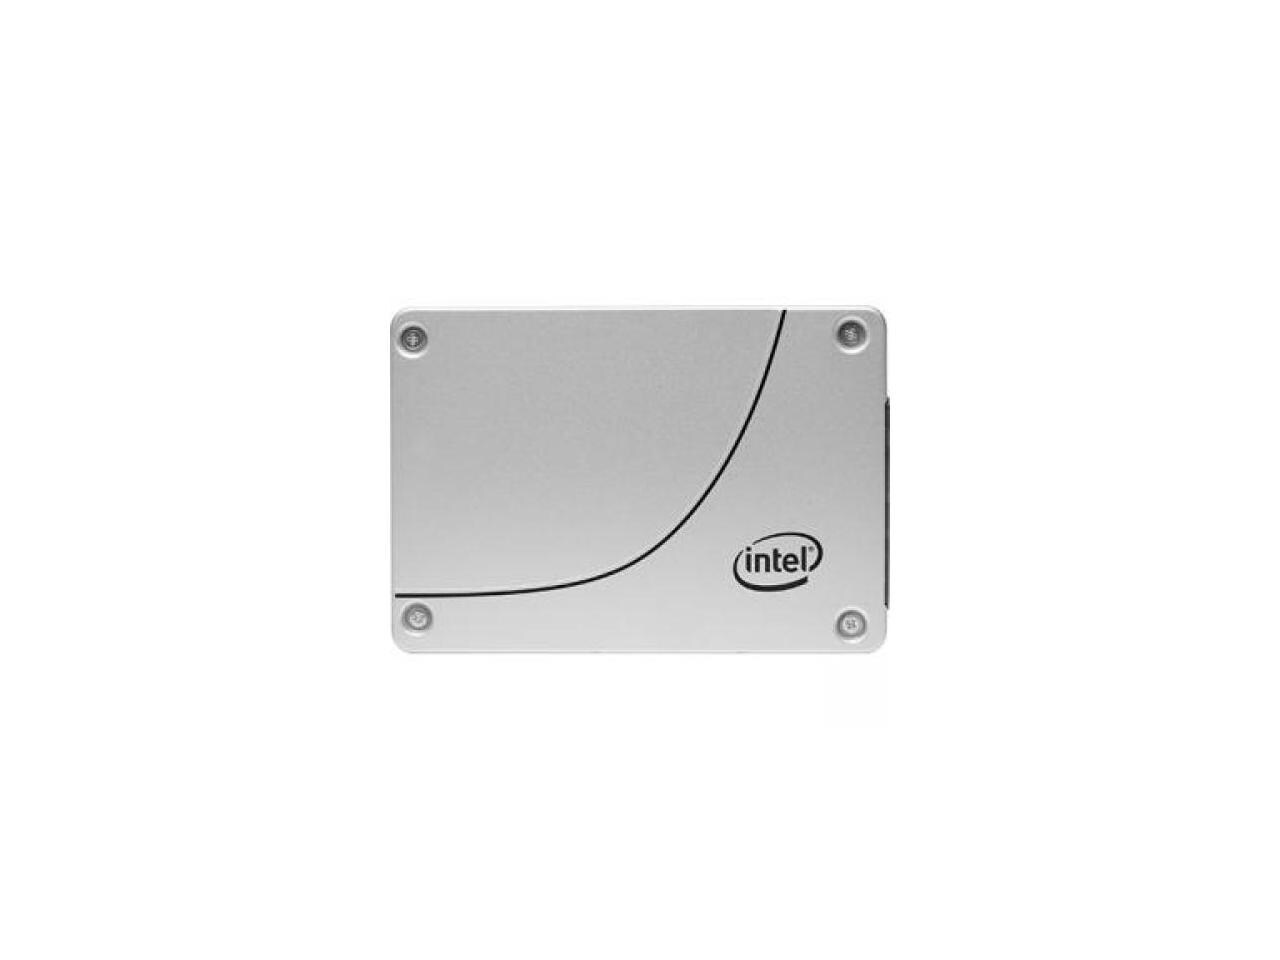 Intel Solid-State Drive DC S3520 Series - solid state drive - 150 GB - PCI Express 3.0 (NVMe)